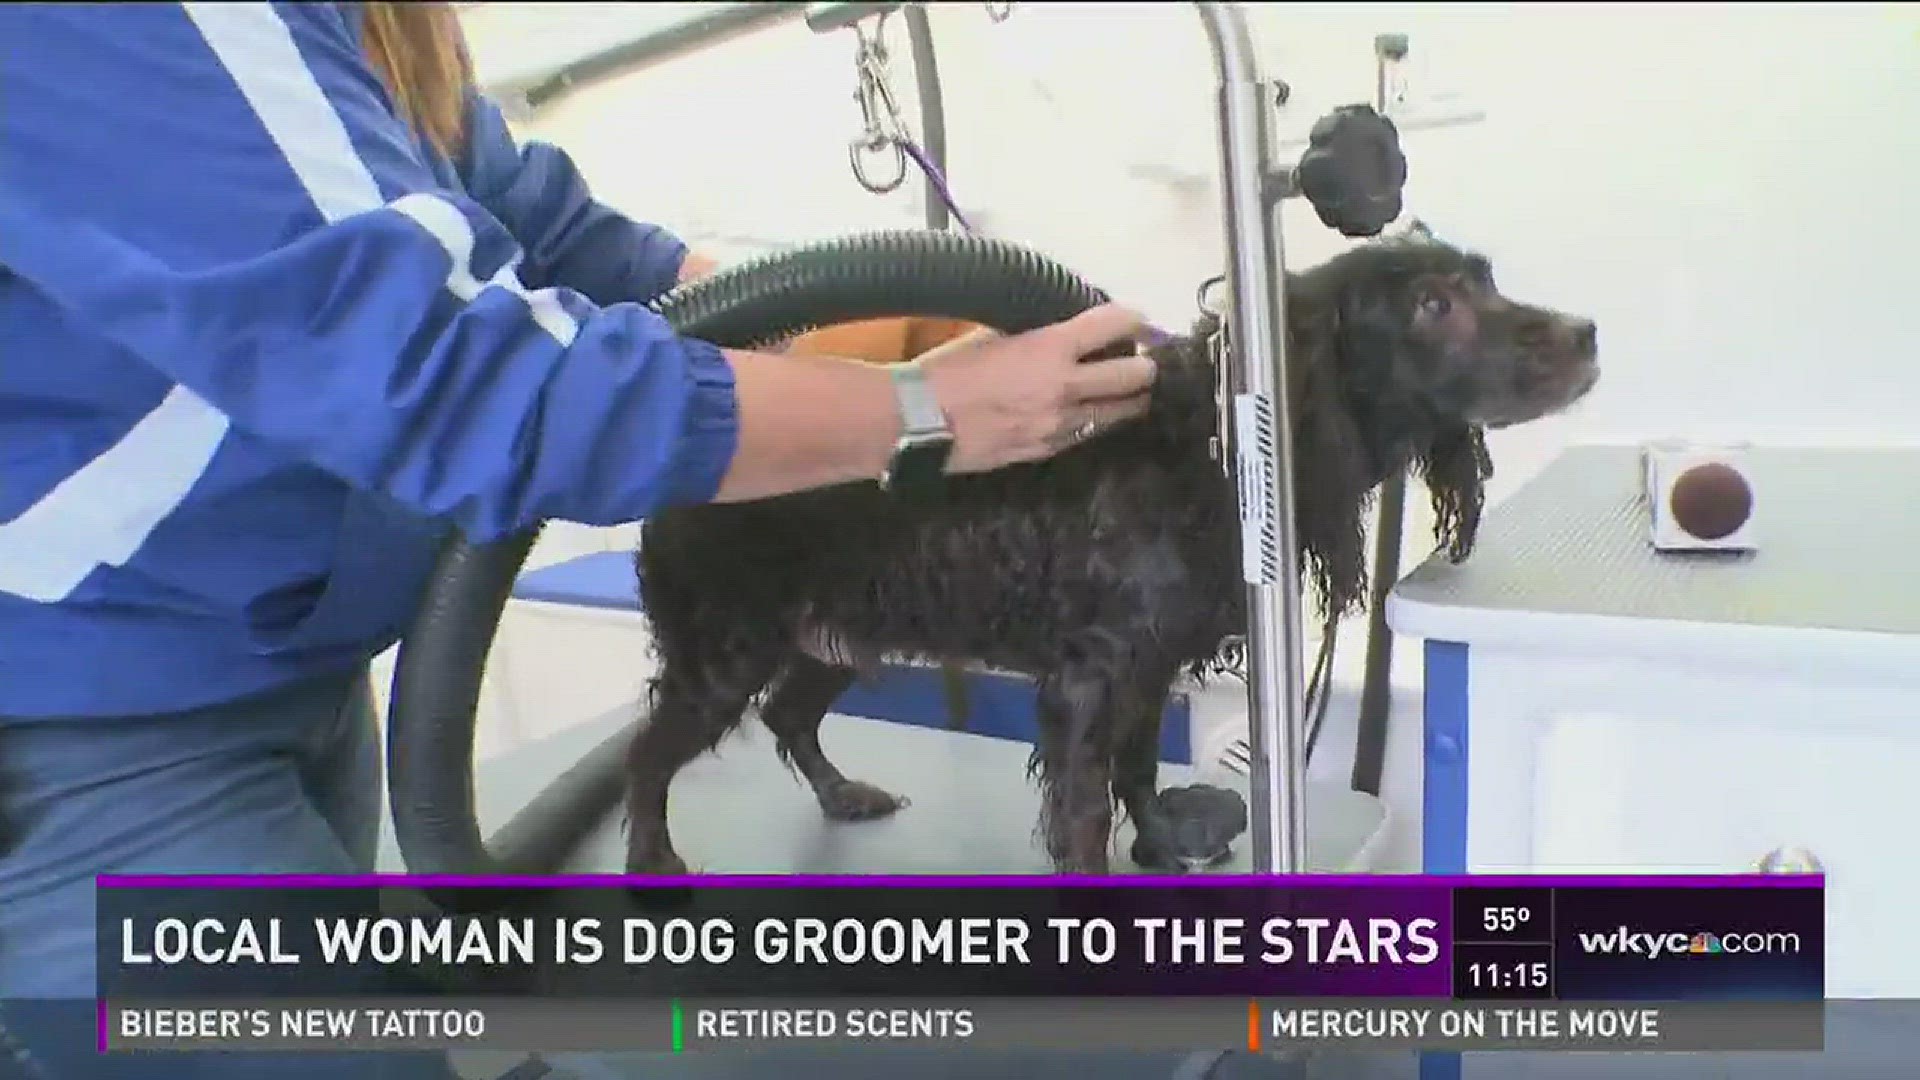 Local woman is dog groomer to the stars